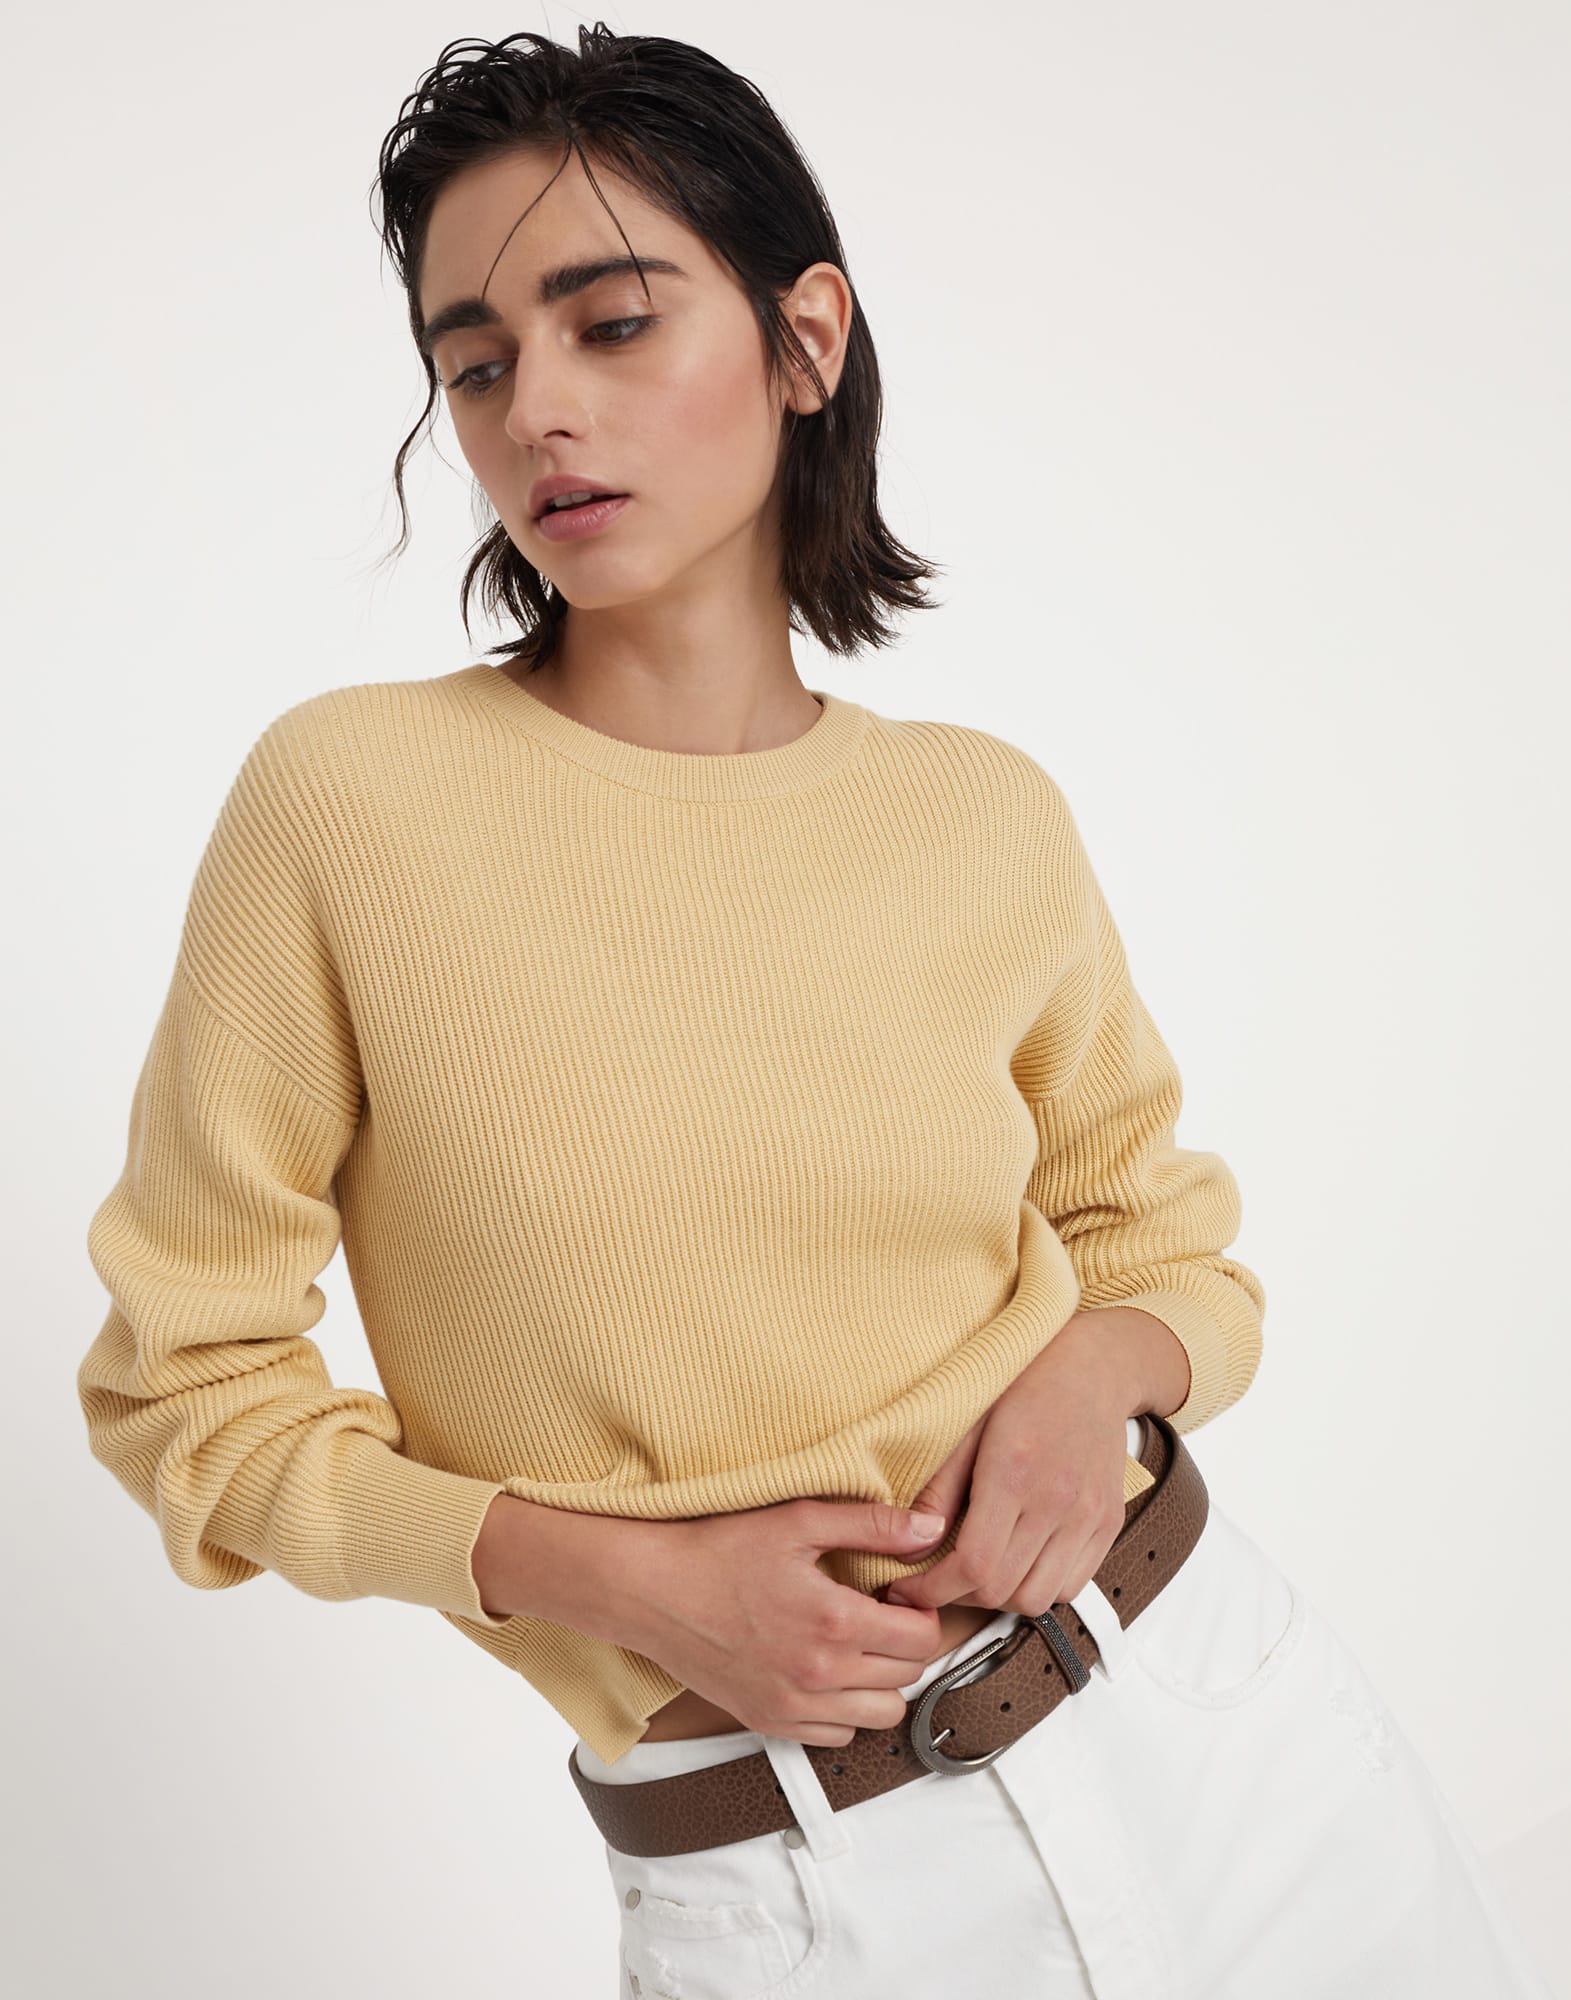 Knit Sweaters, Cardigans & Jumpers for Women